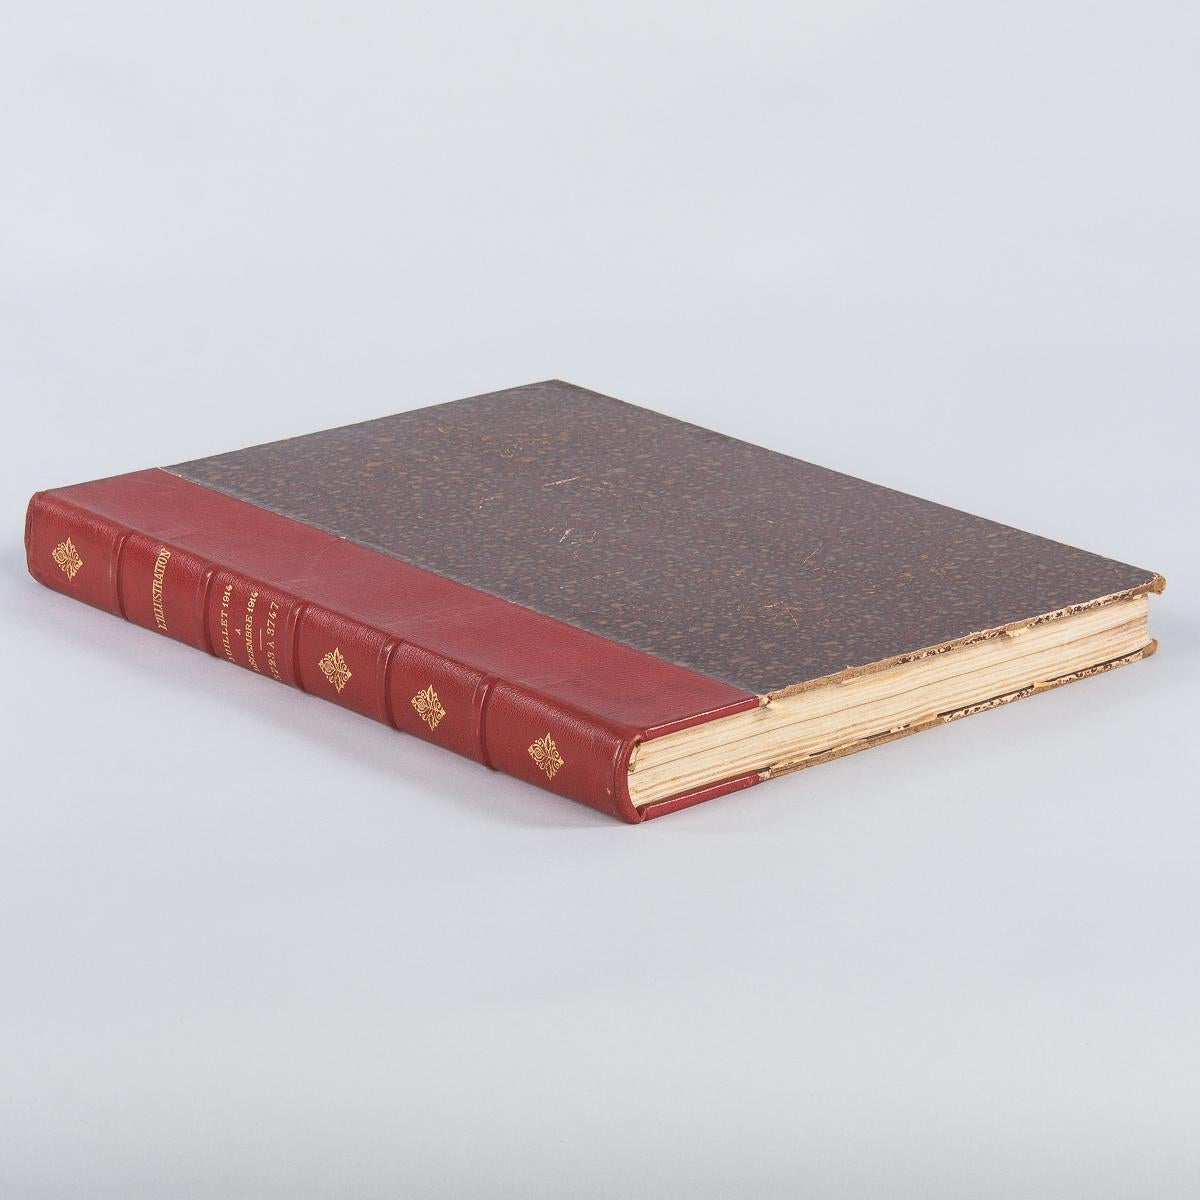 World War One Illustrated French Leather Bound Books, 1914-1918 7